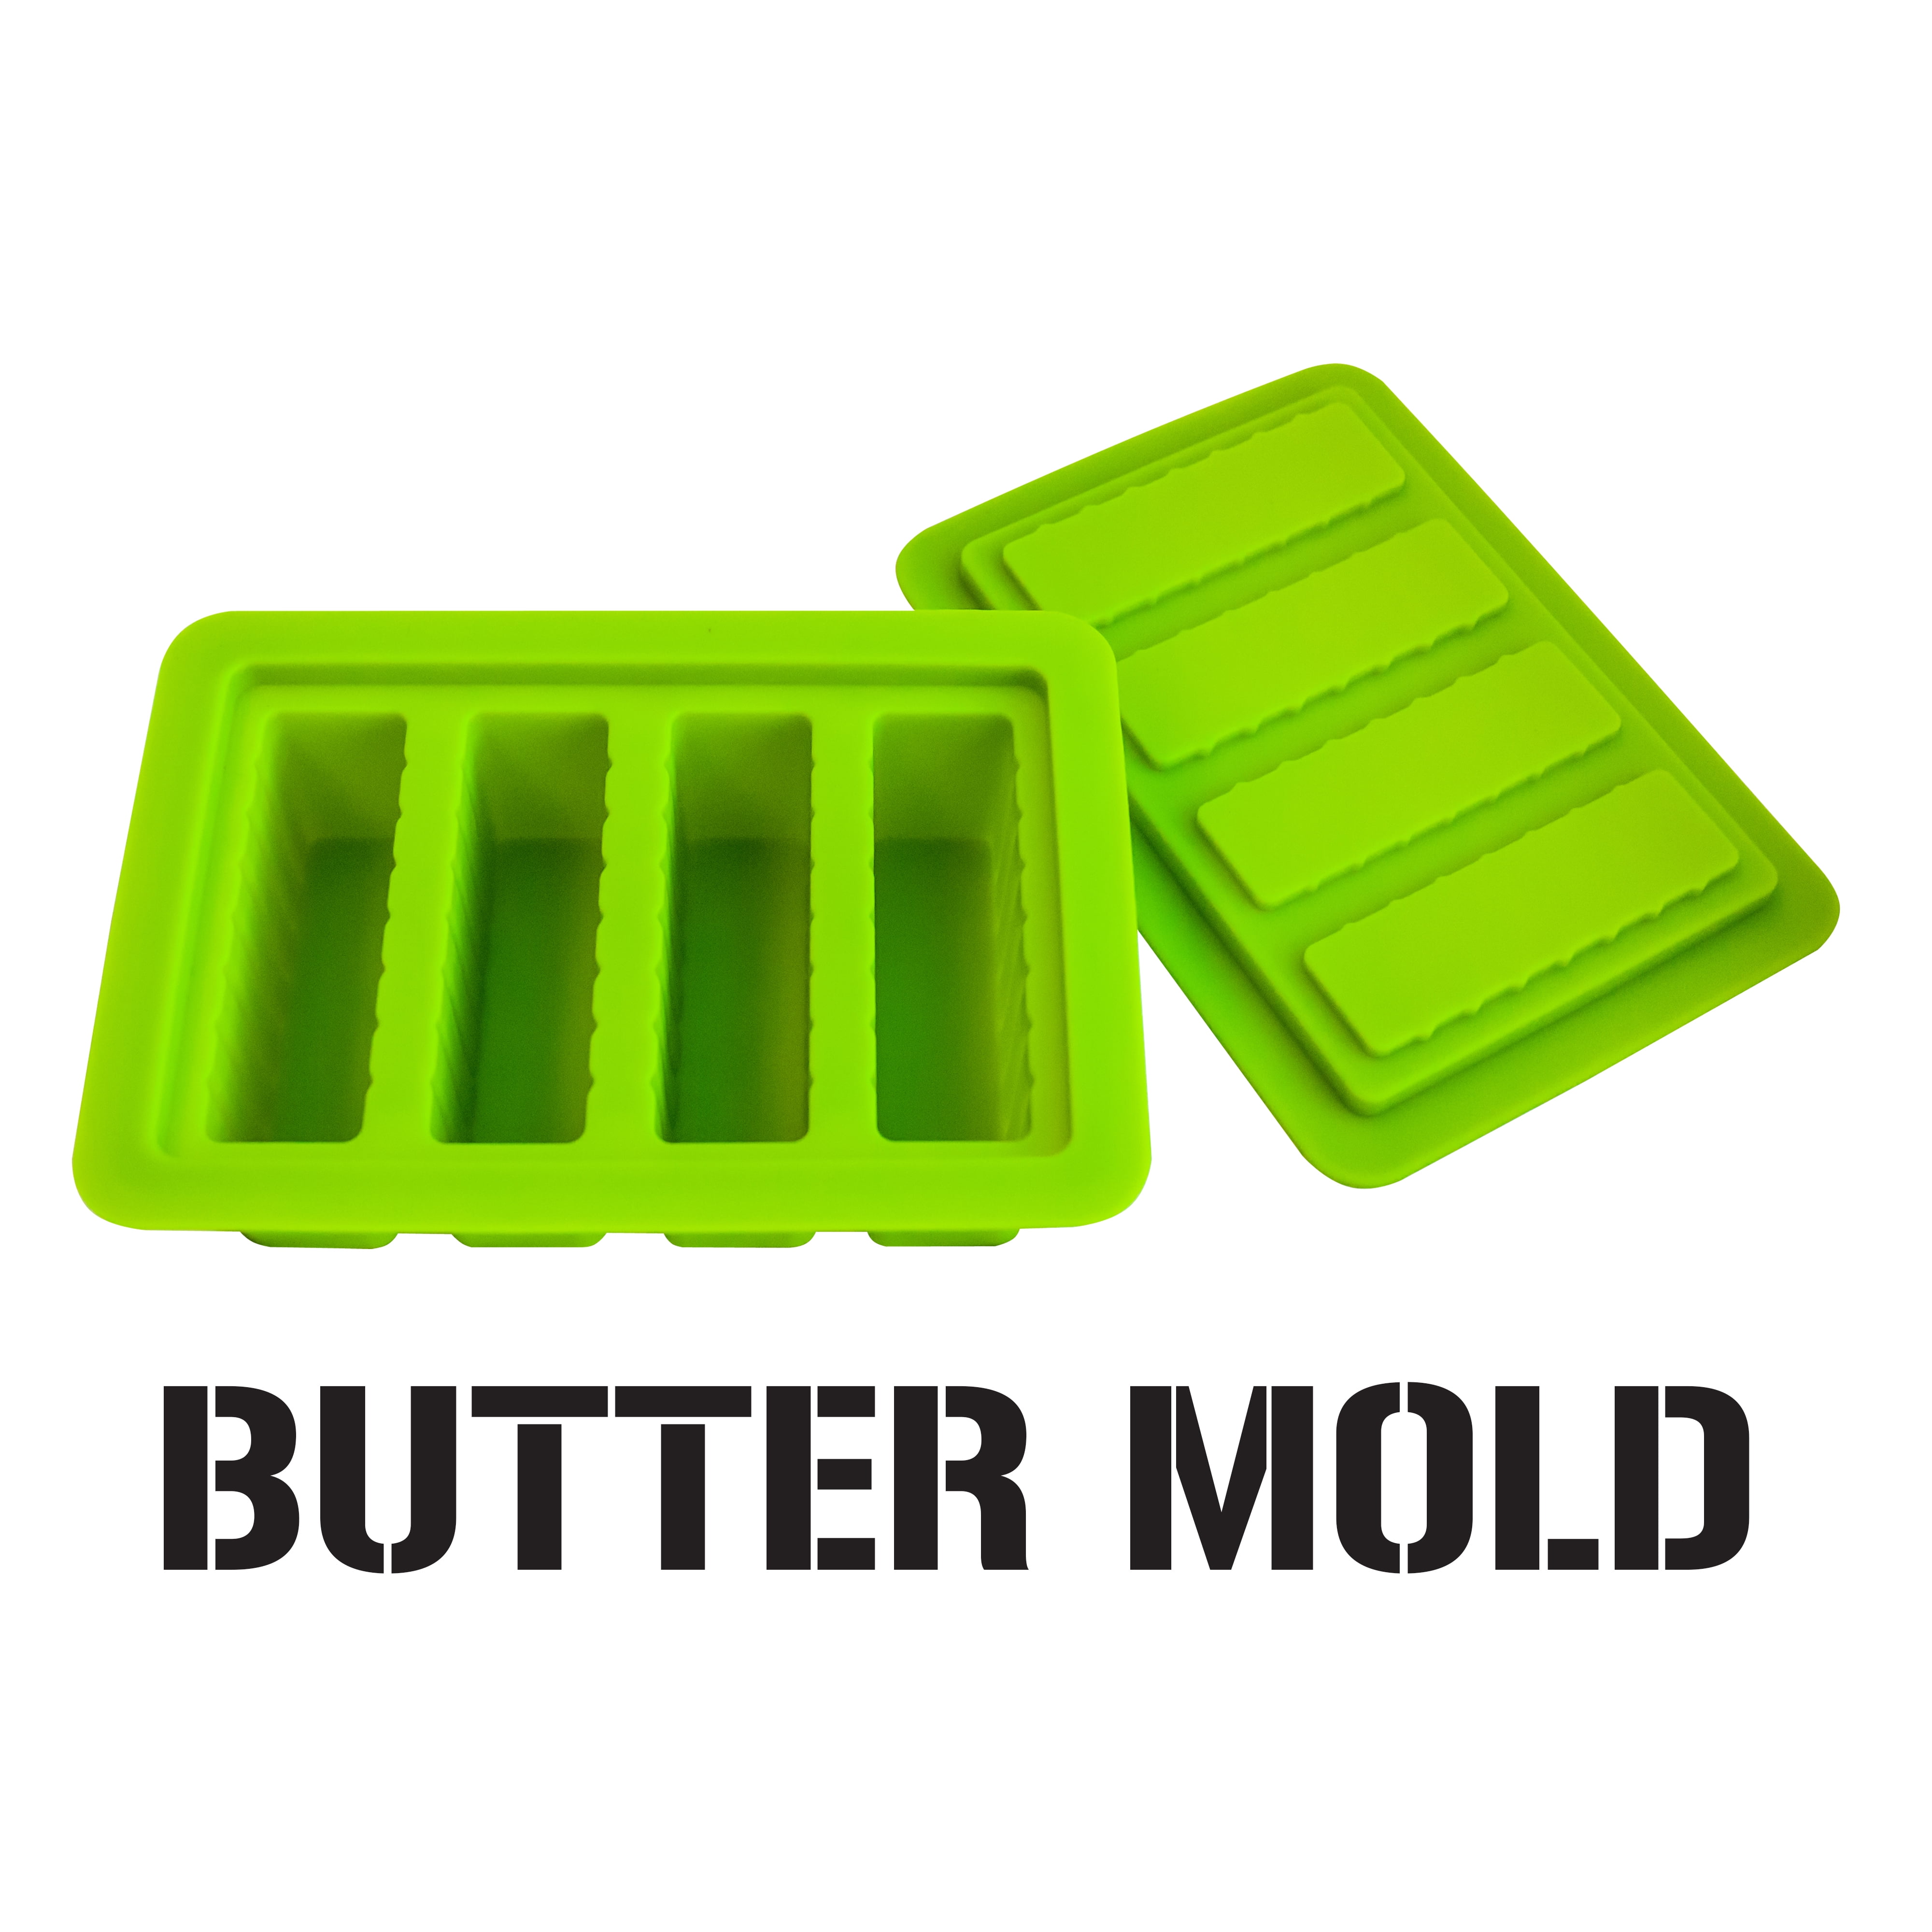 pizety Butter Molds Large 4 Cavities Silicone Butter Mold Pudding & Jello Shot Mold Butter Stick molds,Cheesecake, Butter Mold with Lid Product